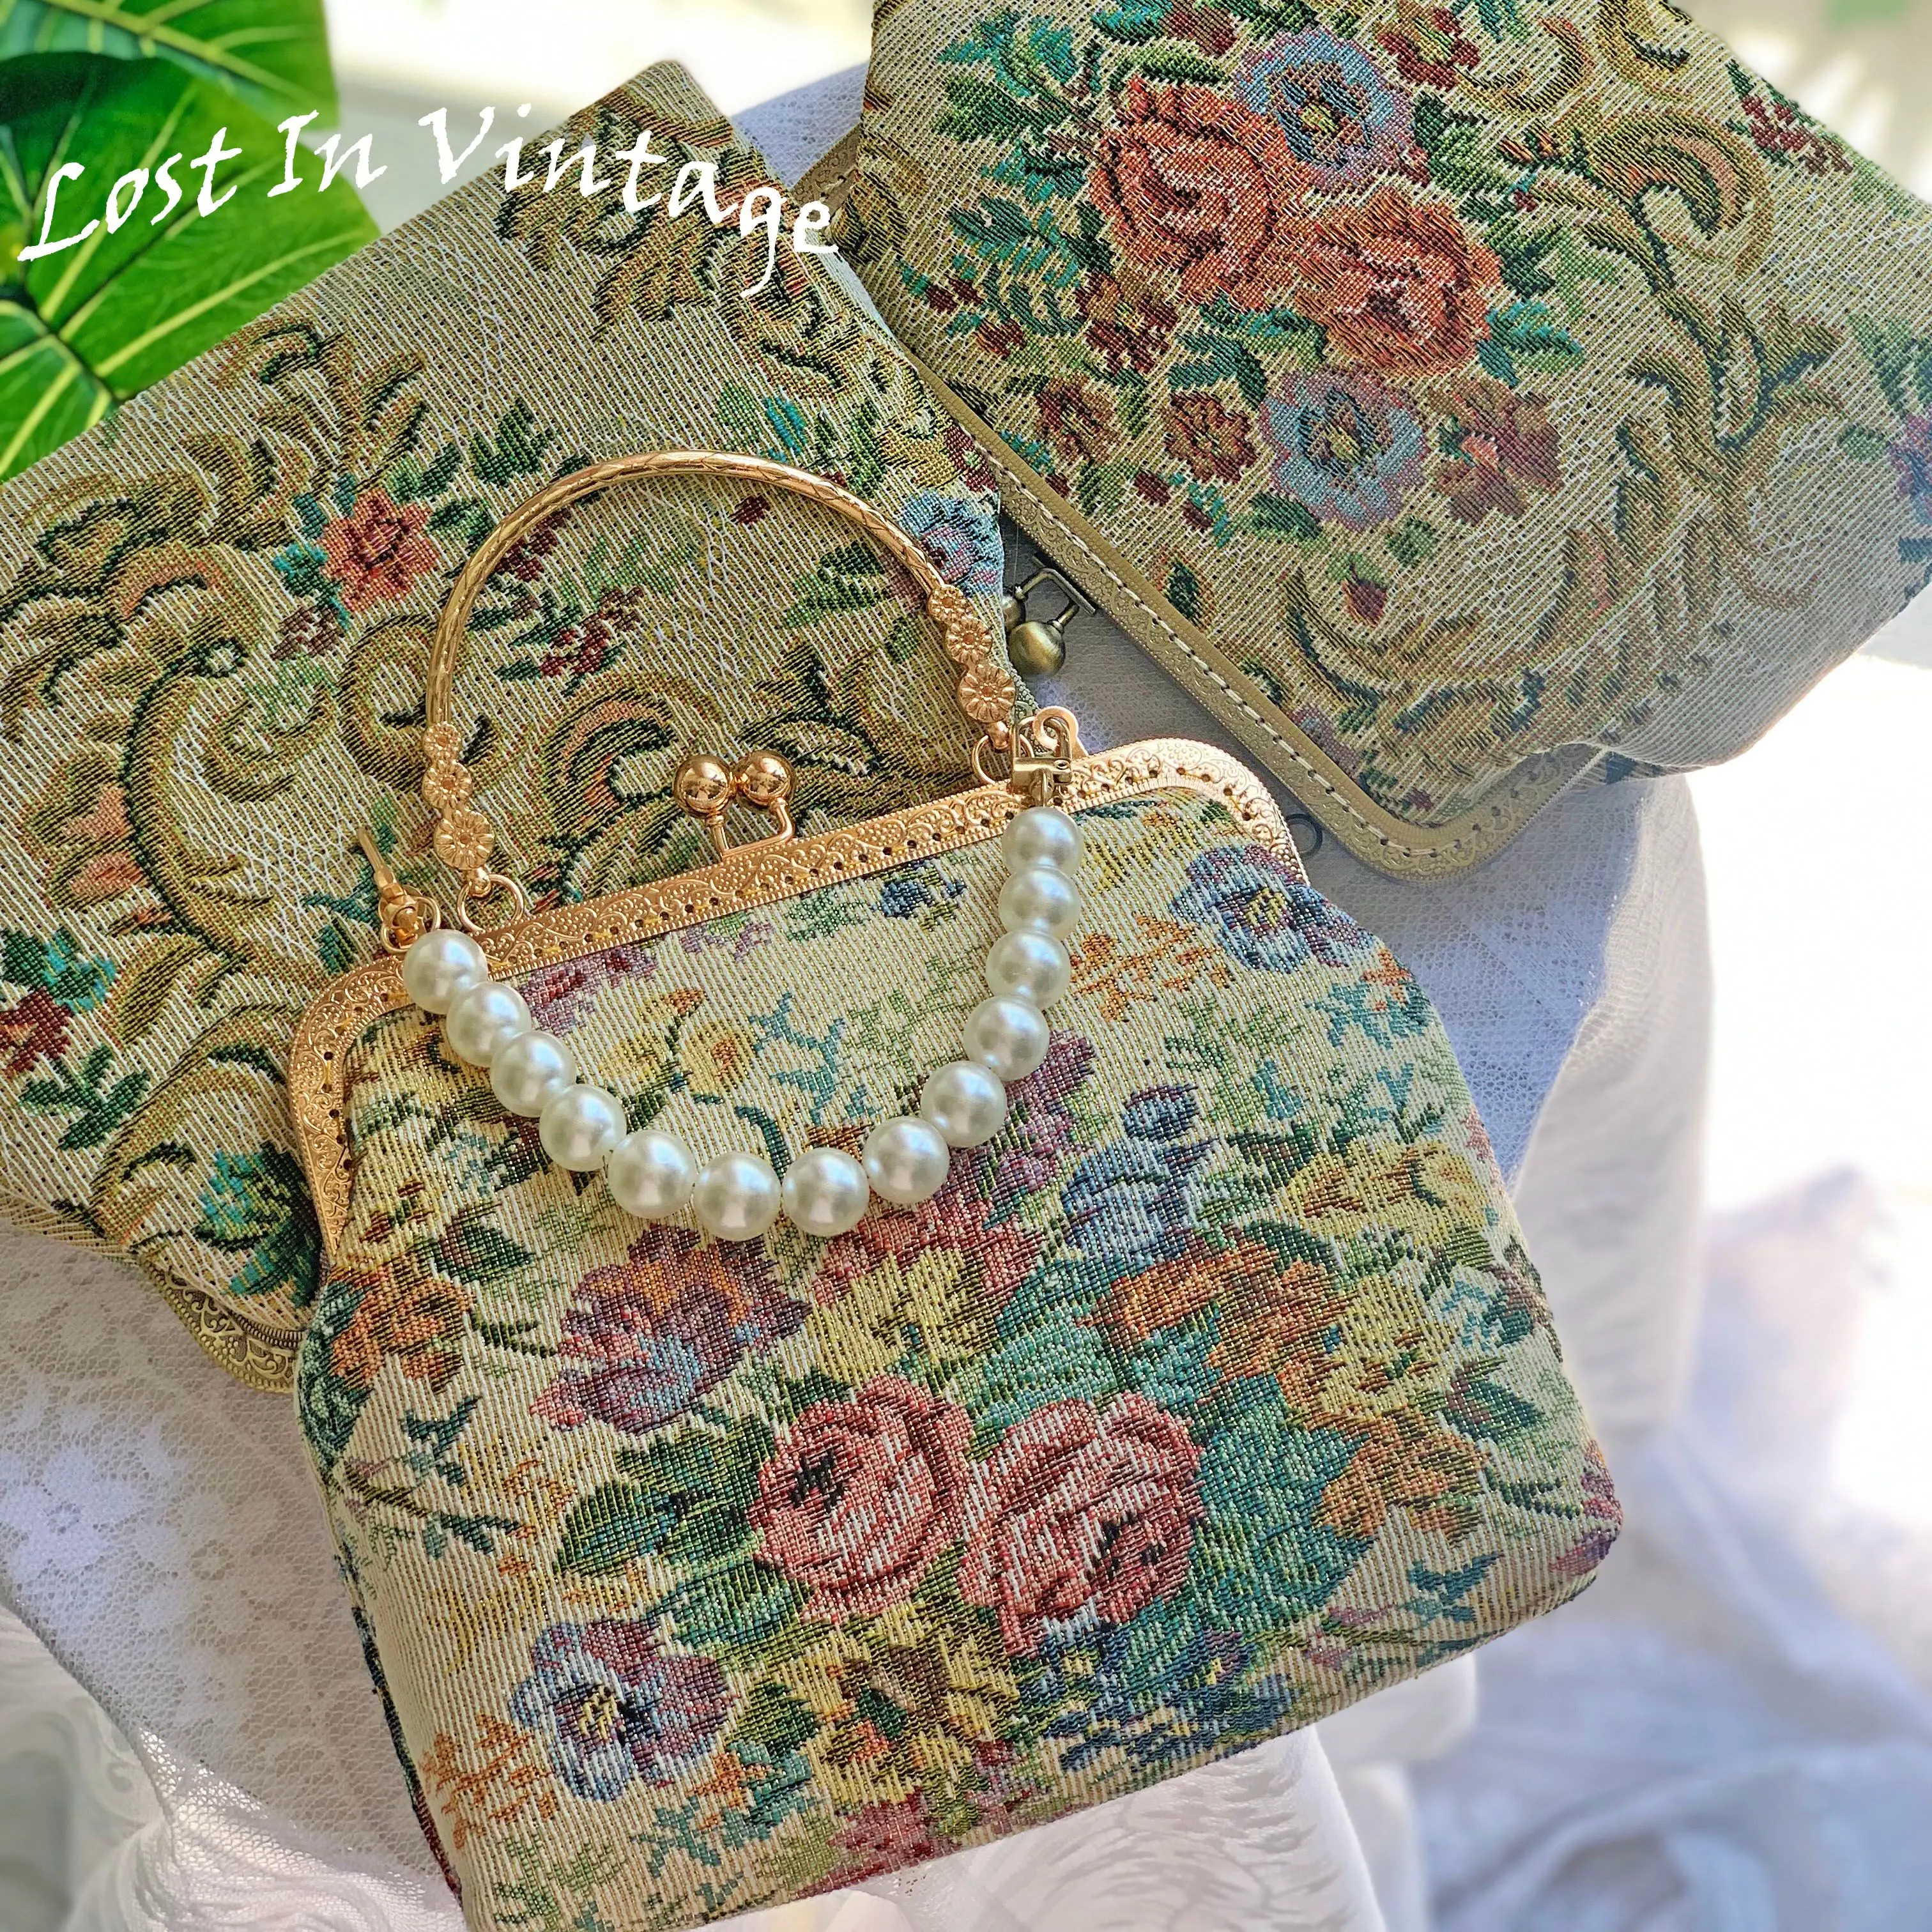 

Lost in Vinatge Inspiration Baroque Floral Tapestry Clutch Purse Gold-tone Metal Frame Kiss Lock Evening Bag with Pearl Strap